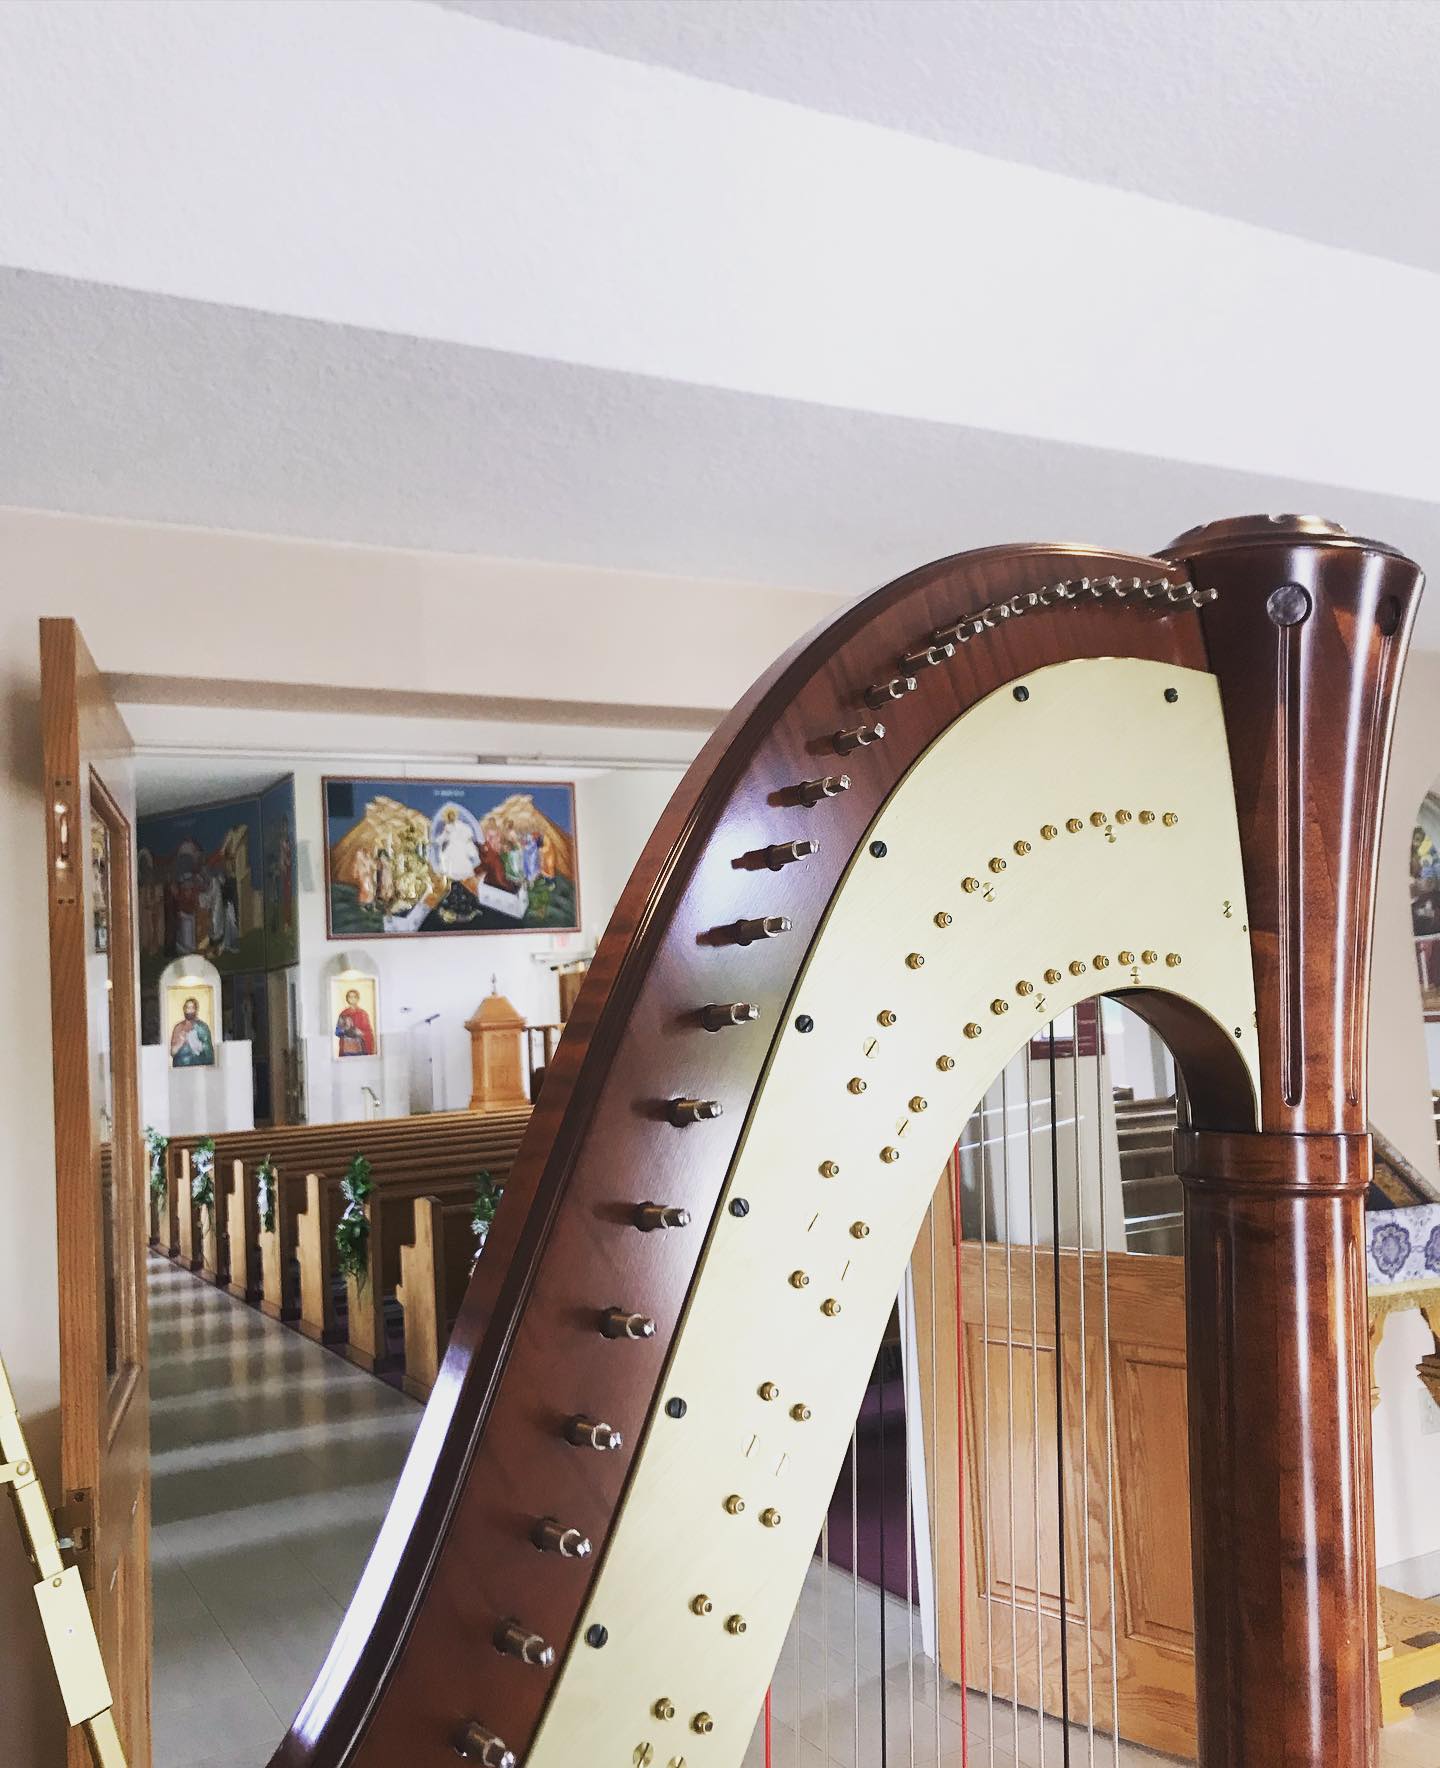 Harpist for hire in Fort Wayne Indiana Picture of Harpist view set up at a Church chapel for a Wedding